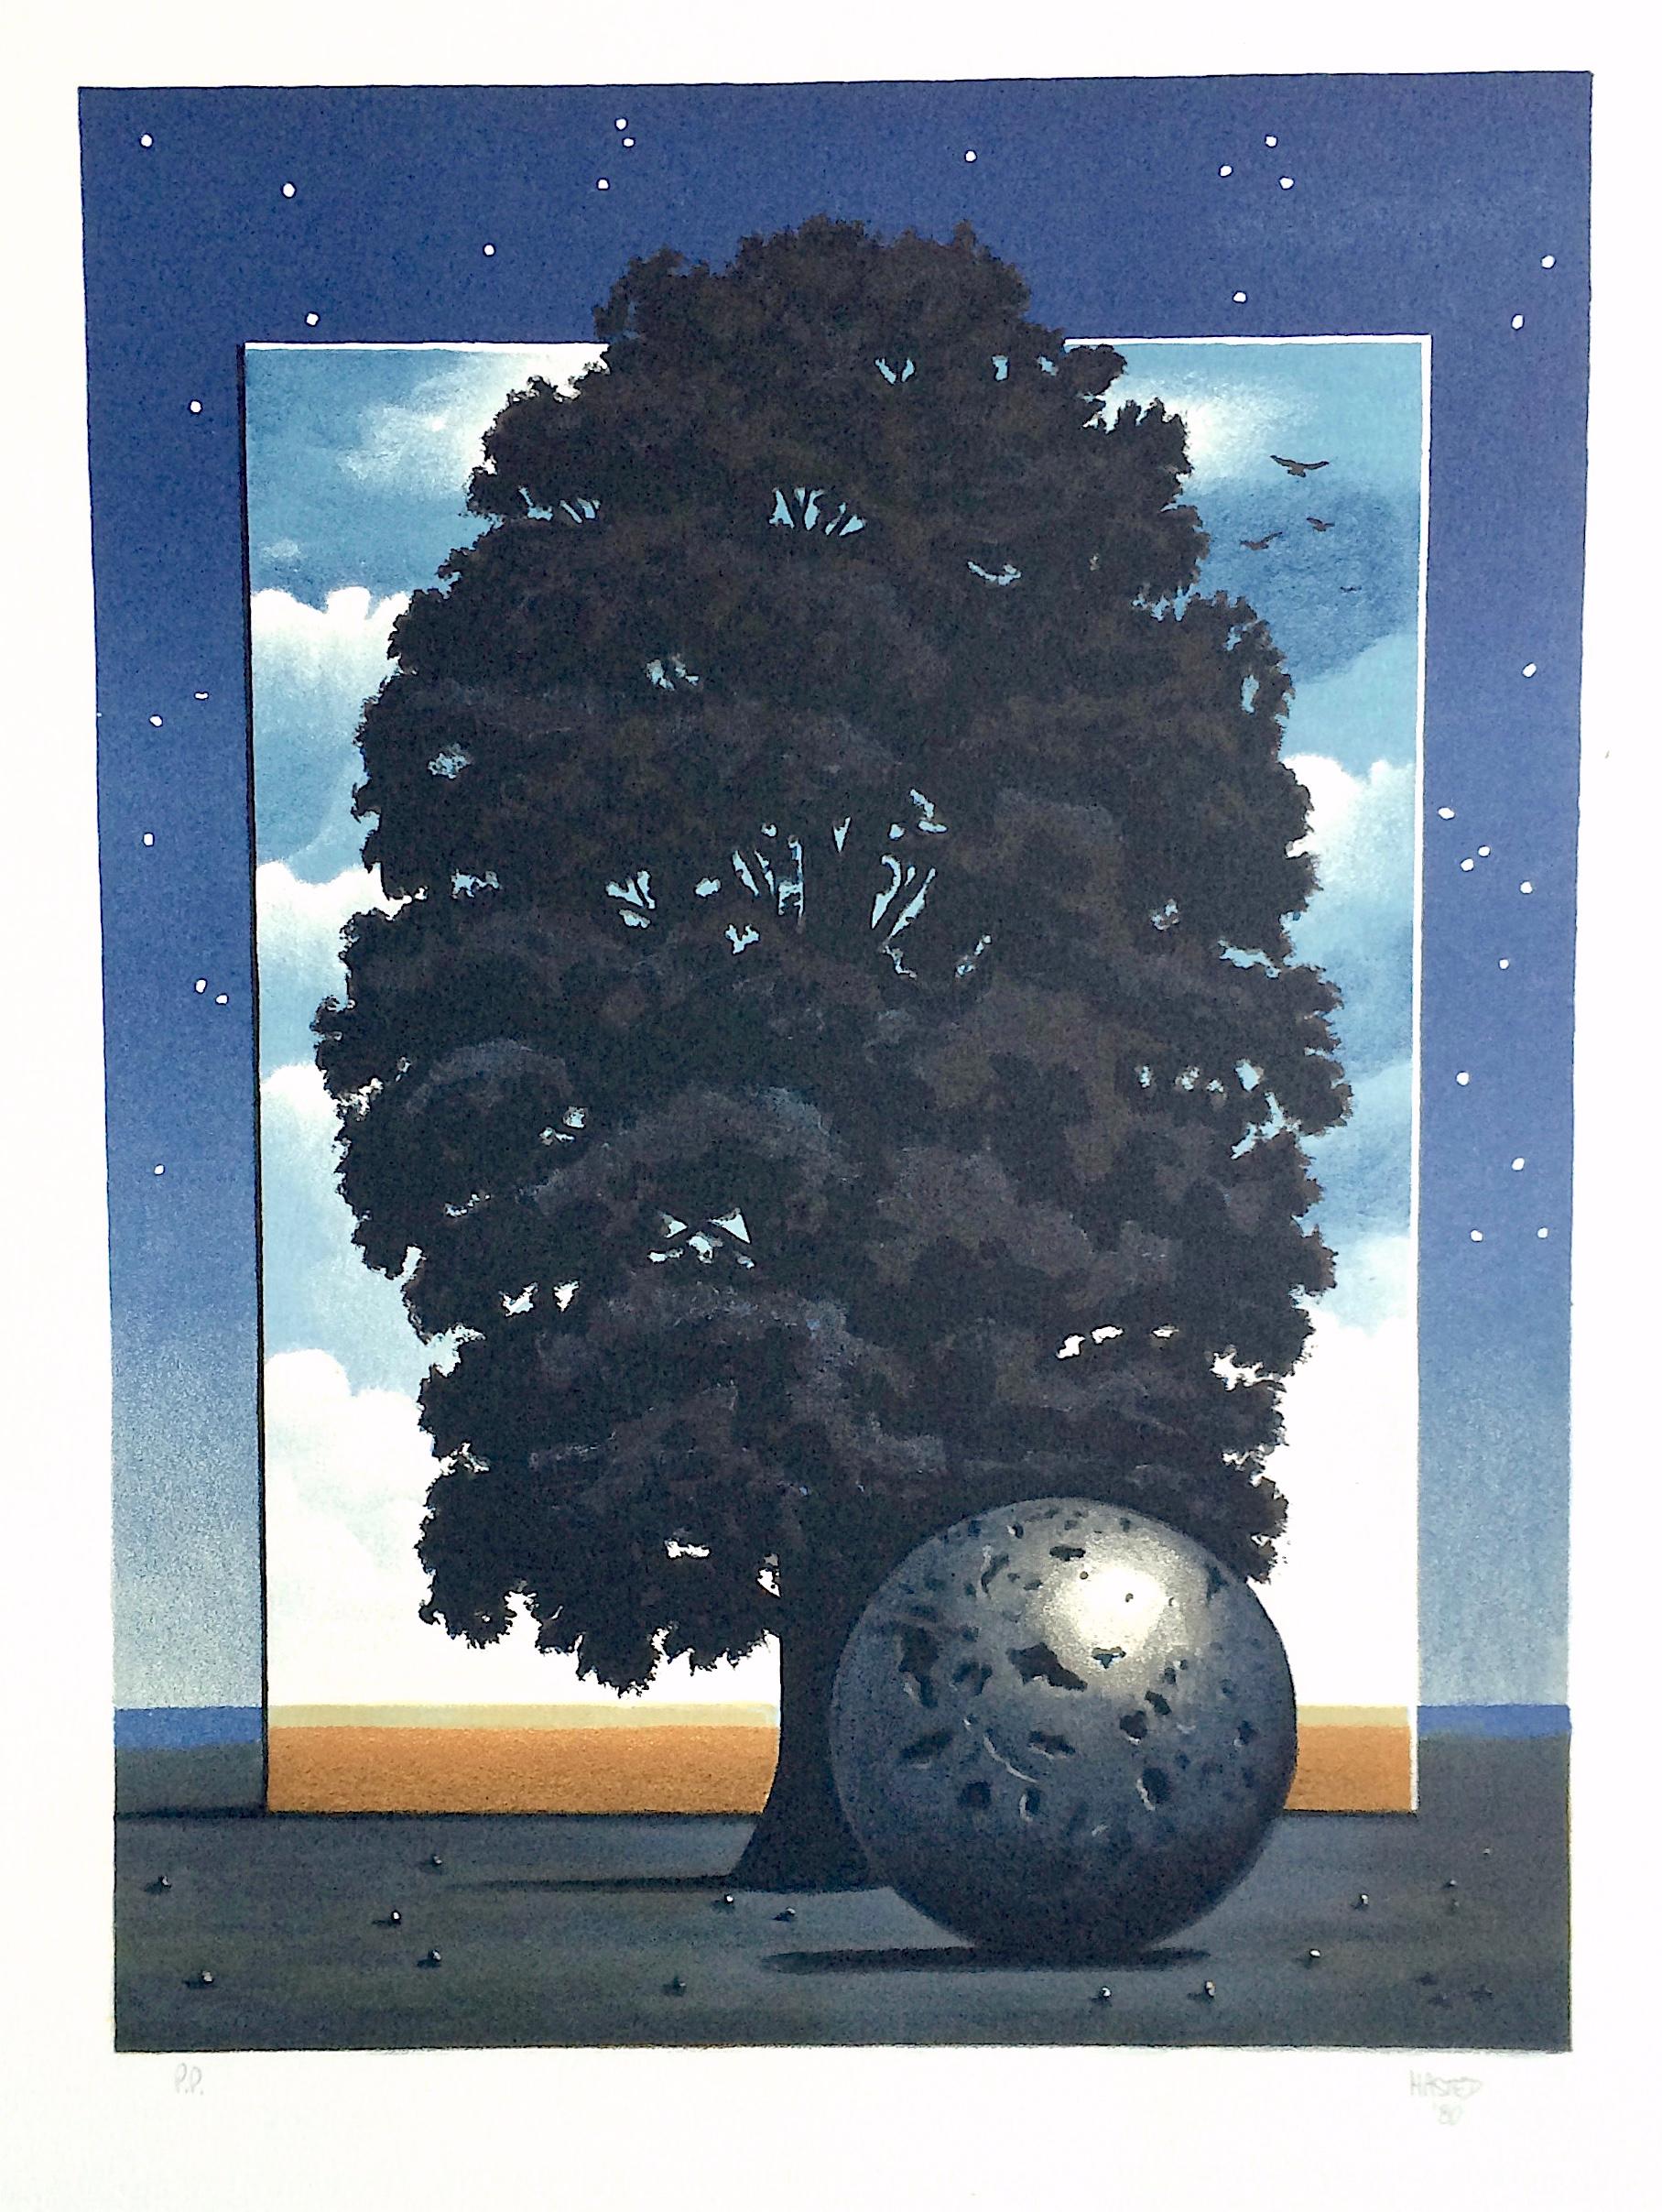 LIGHT OF DISCOVERY Hand Drawn Lithograph, Surrealist Landscape, Night Sky, Tree  - Print by Michael Hasted